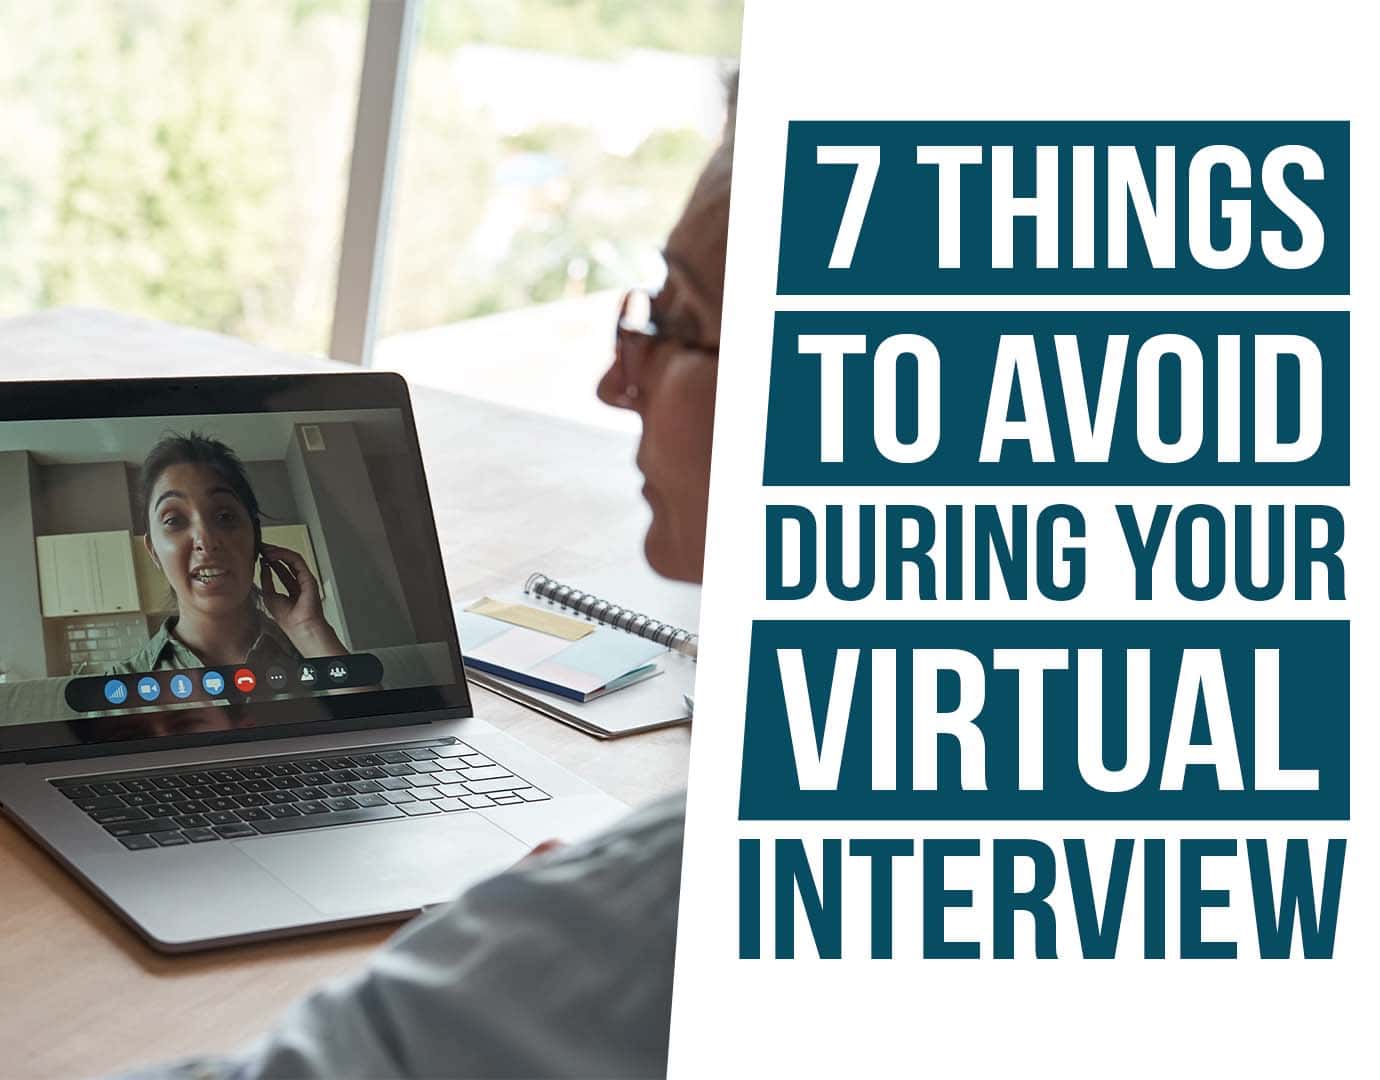 7 Things to avoid during your virtual interview